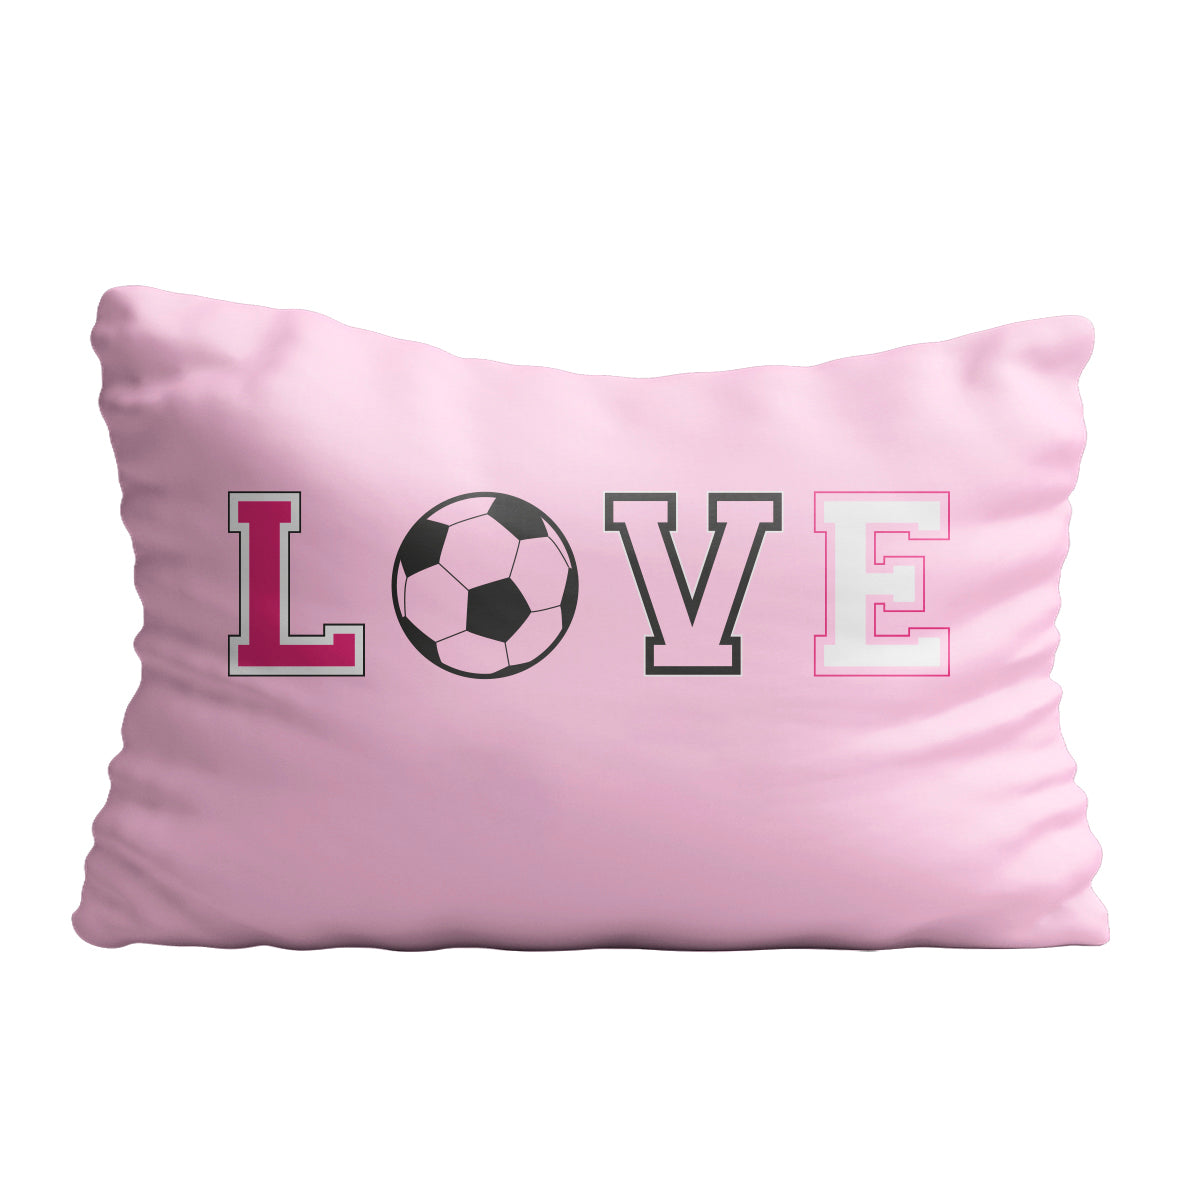 Love soccer name pink pillow case - Wimziy&Co.